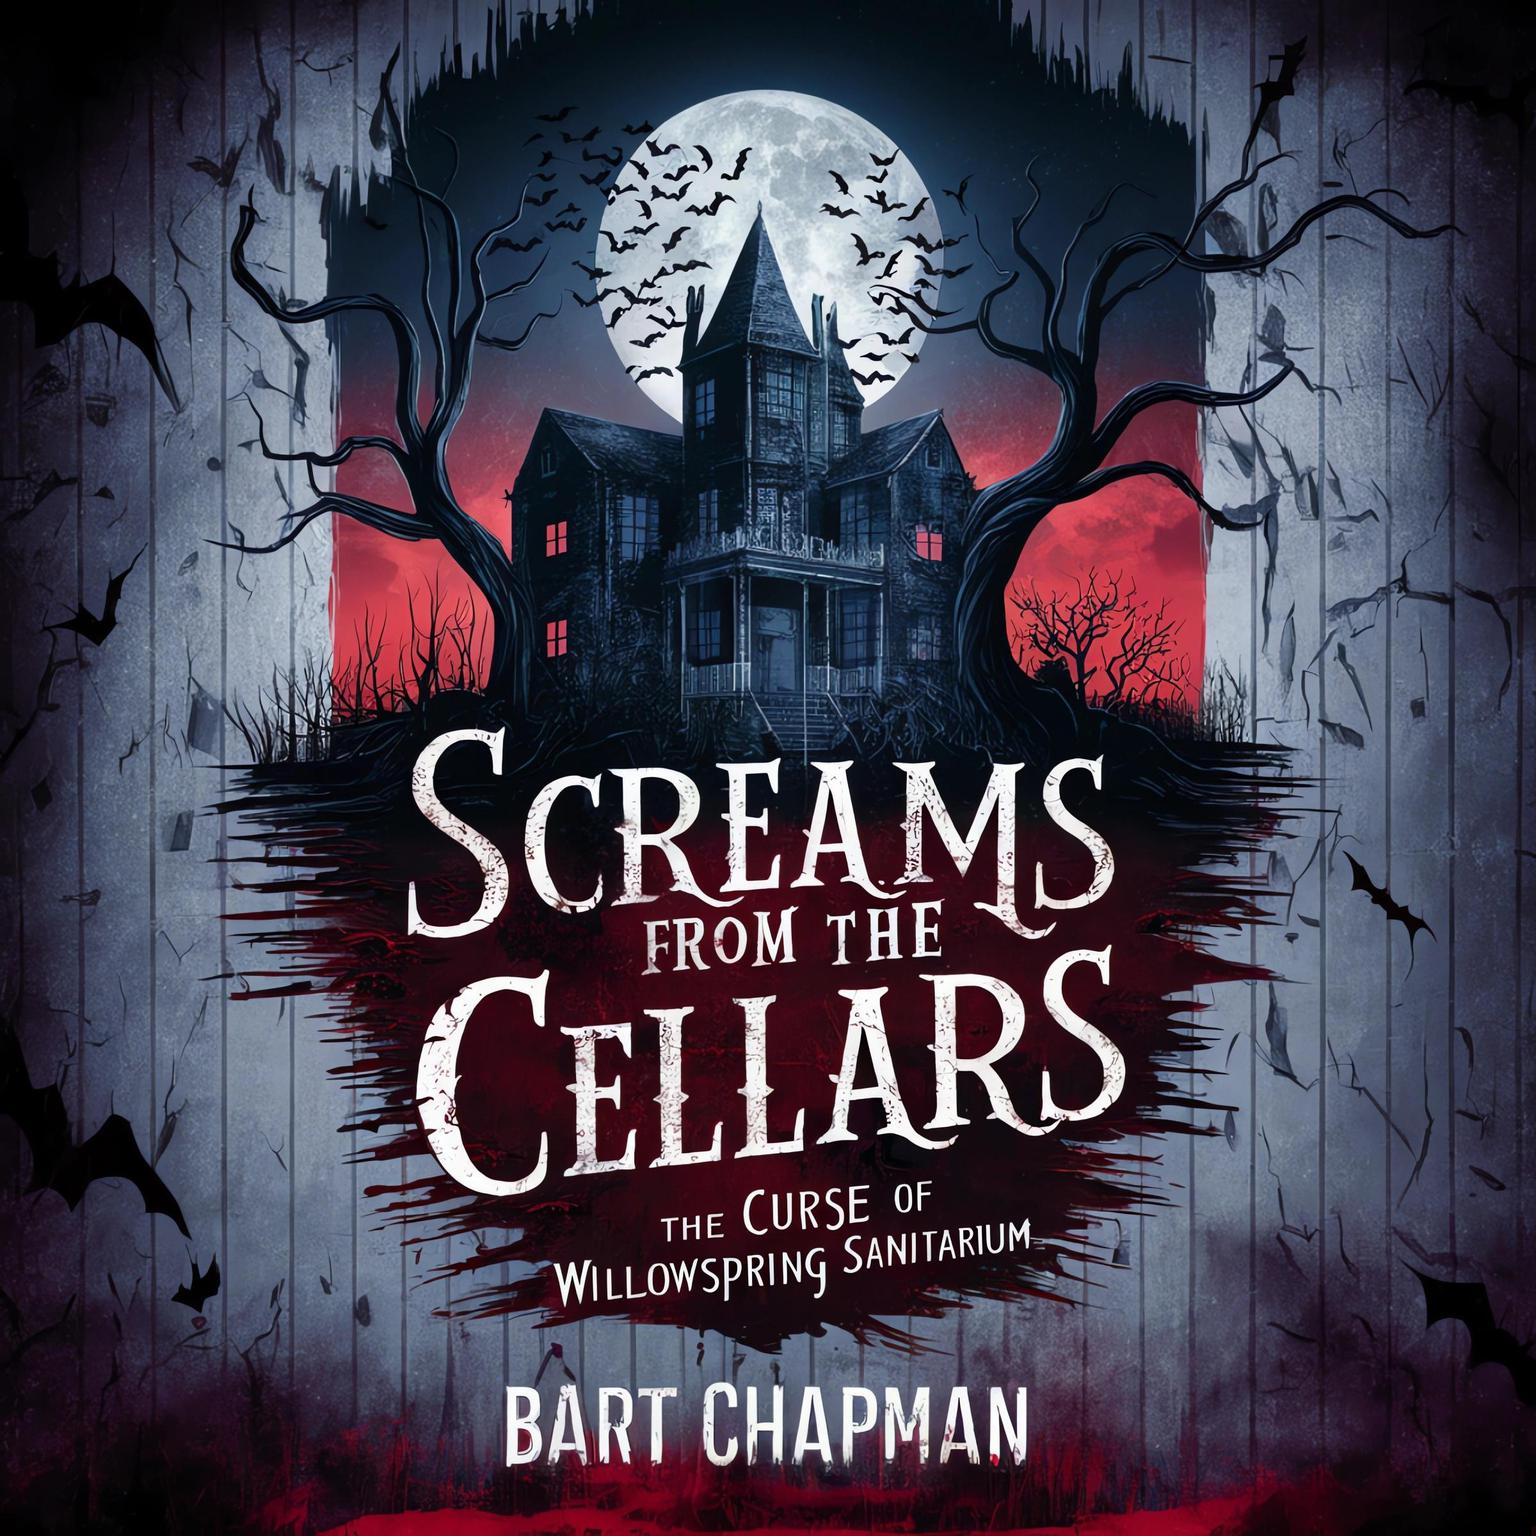 Screams From The Cellars: The Curse Of Willowspring Sanitarium Audiobook, by Bart Chapman